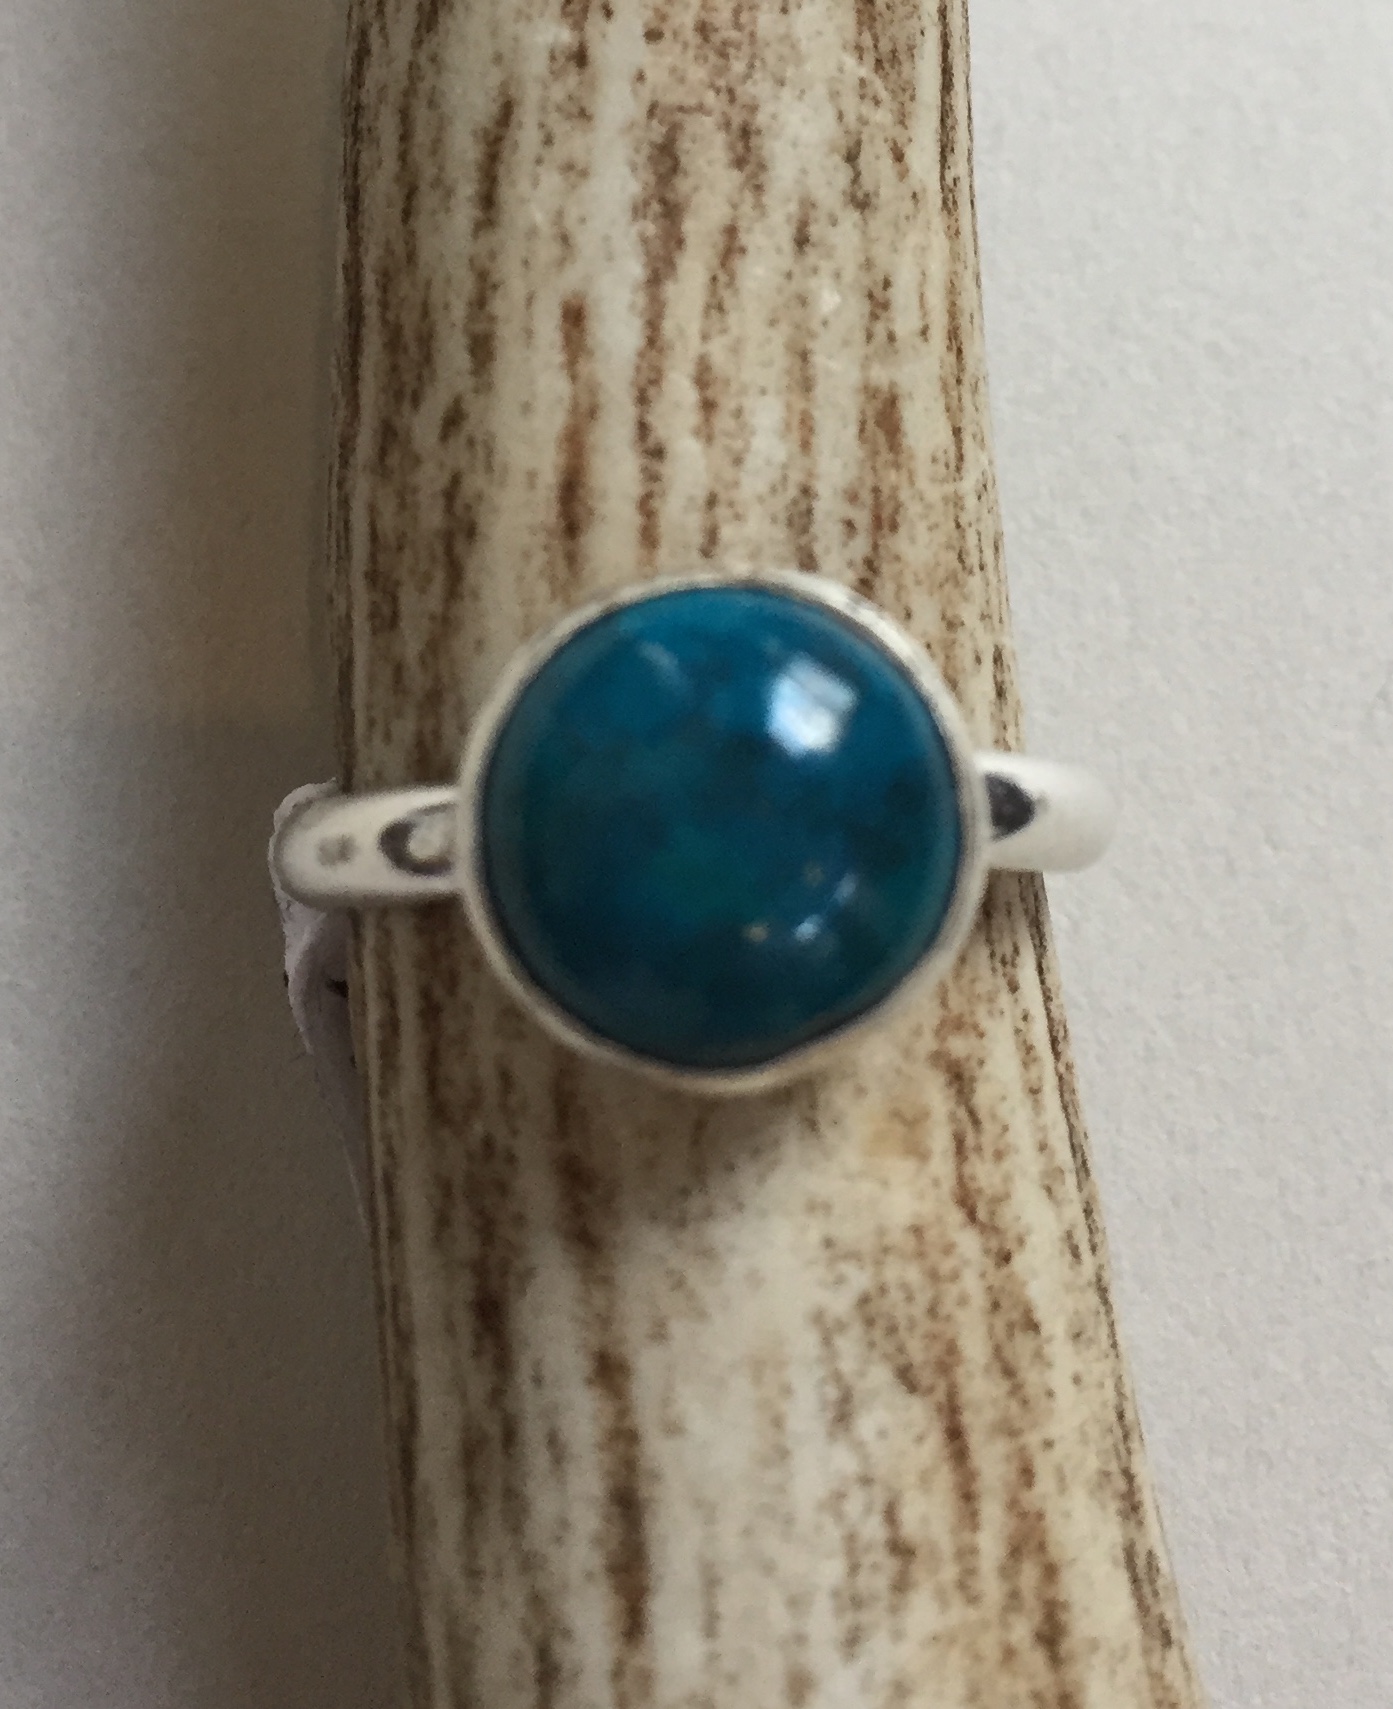 Chrysocolla Ring Ma 44
Sterling Silver
$45.